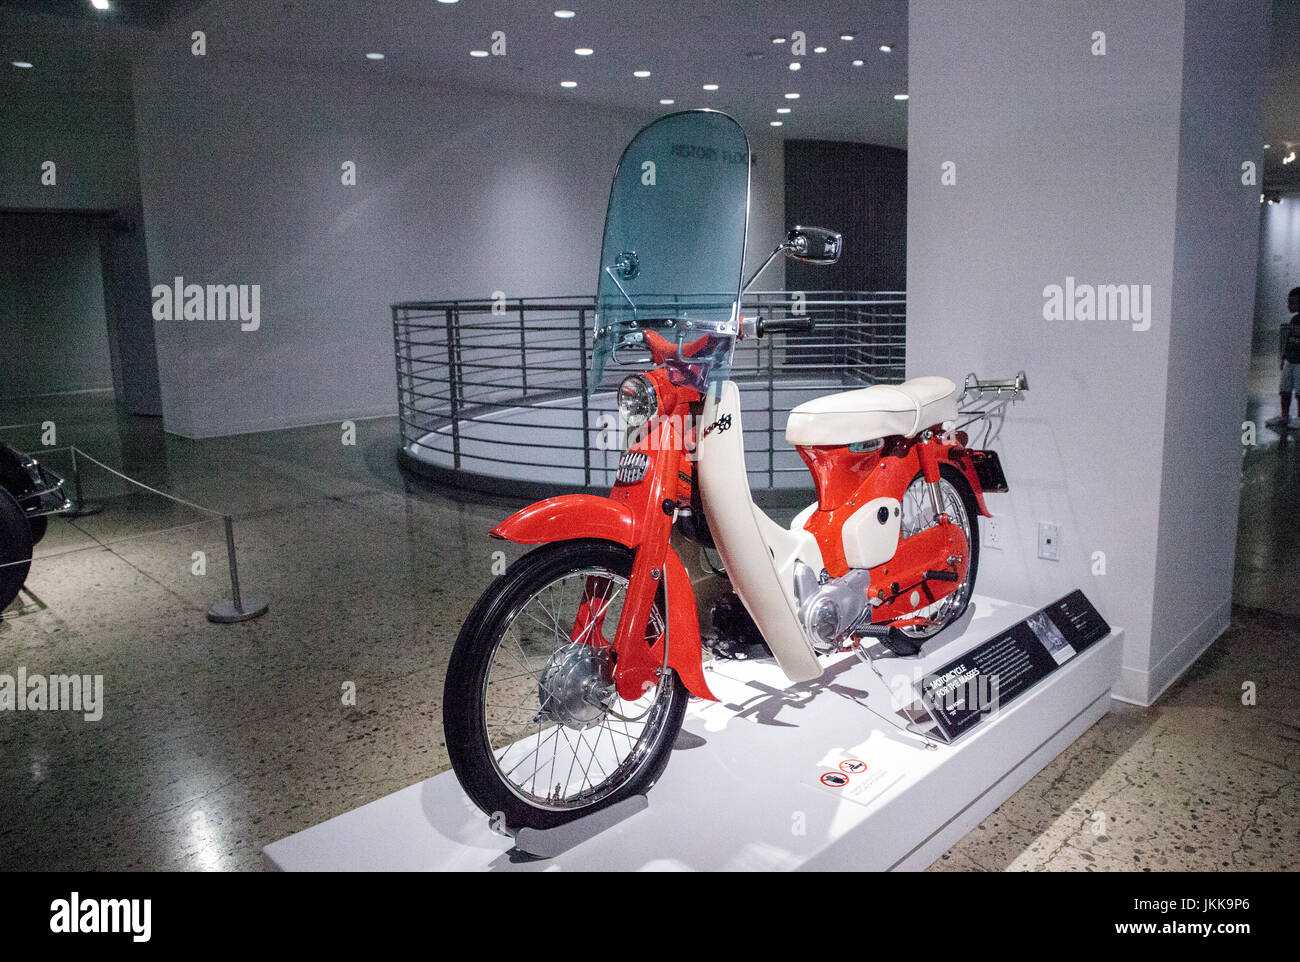 Los Angeles, CA, USA - July 23, 2017: Orange 1961 Honda 50 motorcycle displayed at the Petersen Automotive Museum. Editorial use. Stock Photo